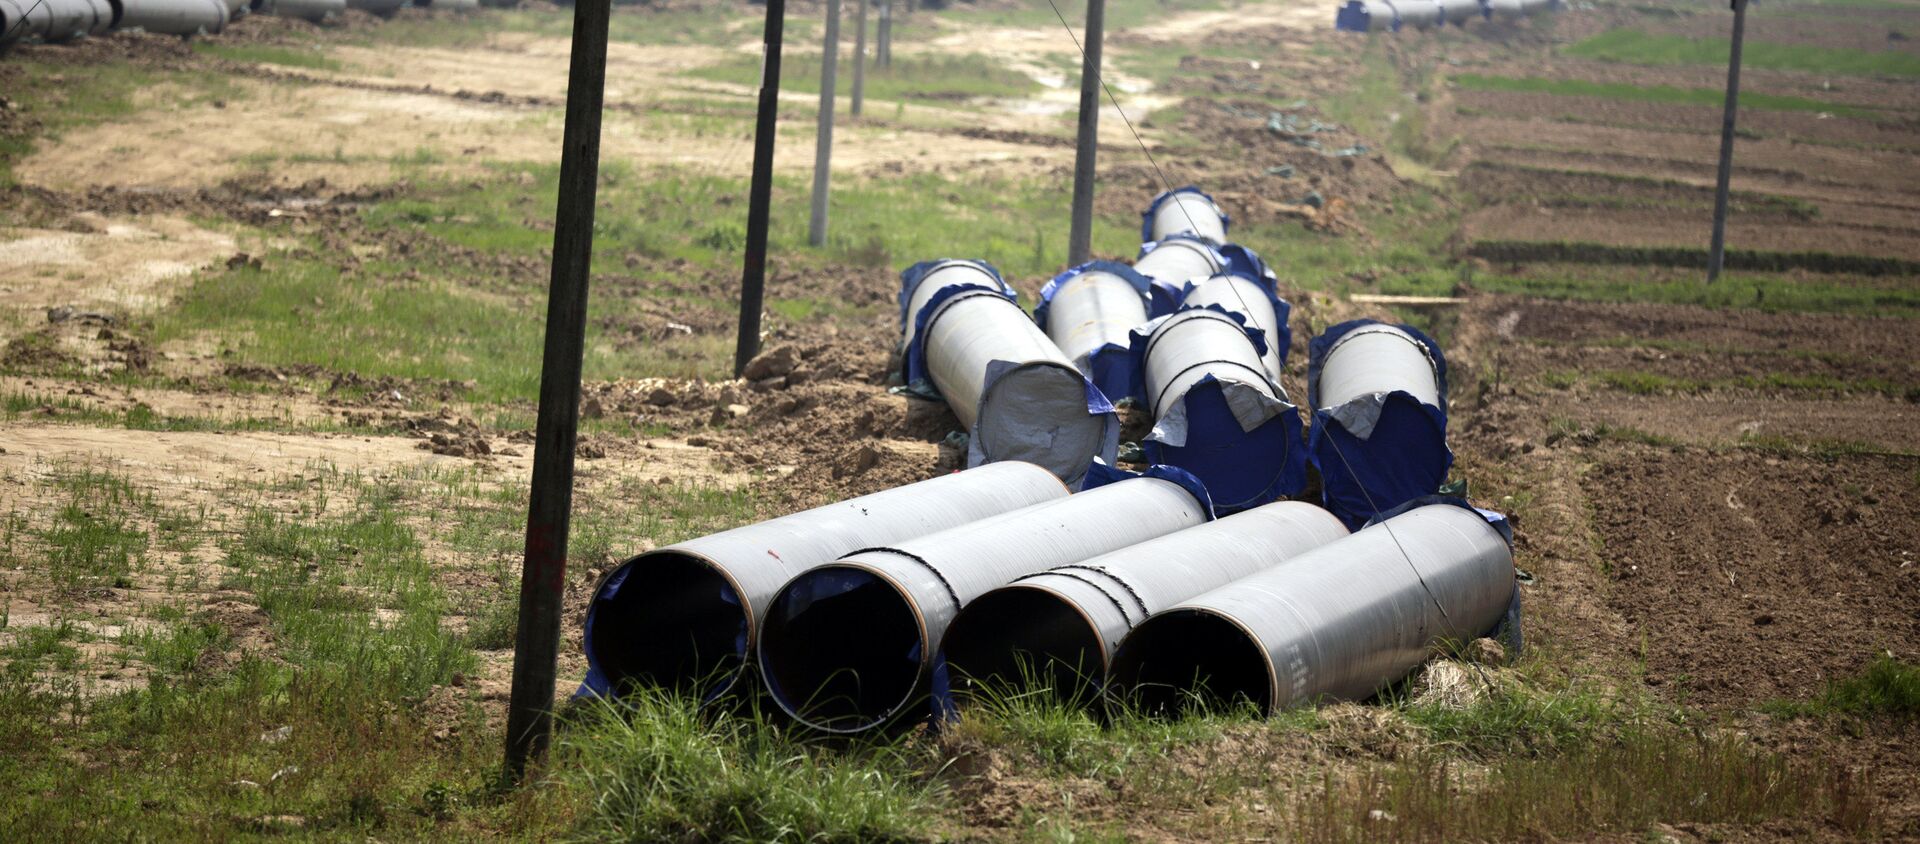 In this May 25, 2012 photo, the pipes for a 770 kilometer (480 mile) pipeline that eventually will carry Middle East gas and oil shipped through the Indian Ocean to thirsty Chinese industries further to the east are placed in fields near Ruili, near Myanmar border,Yunnan Province, China. - Sputnik International, 1920, 11.03.2021